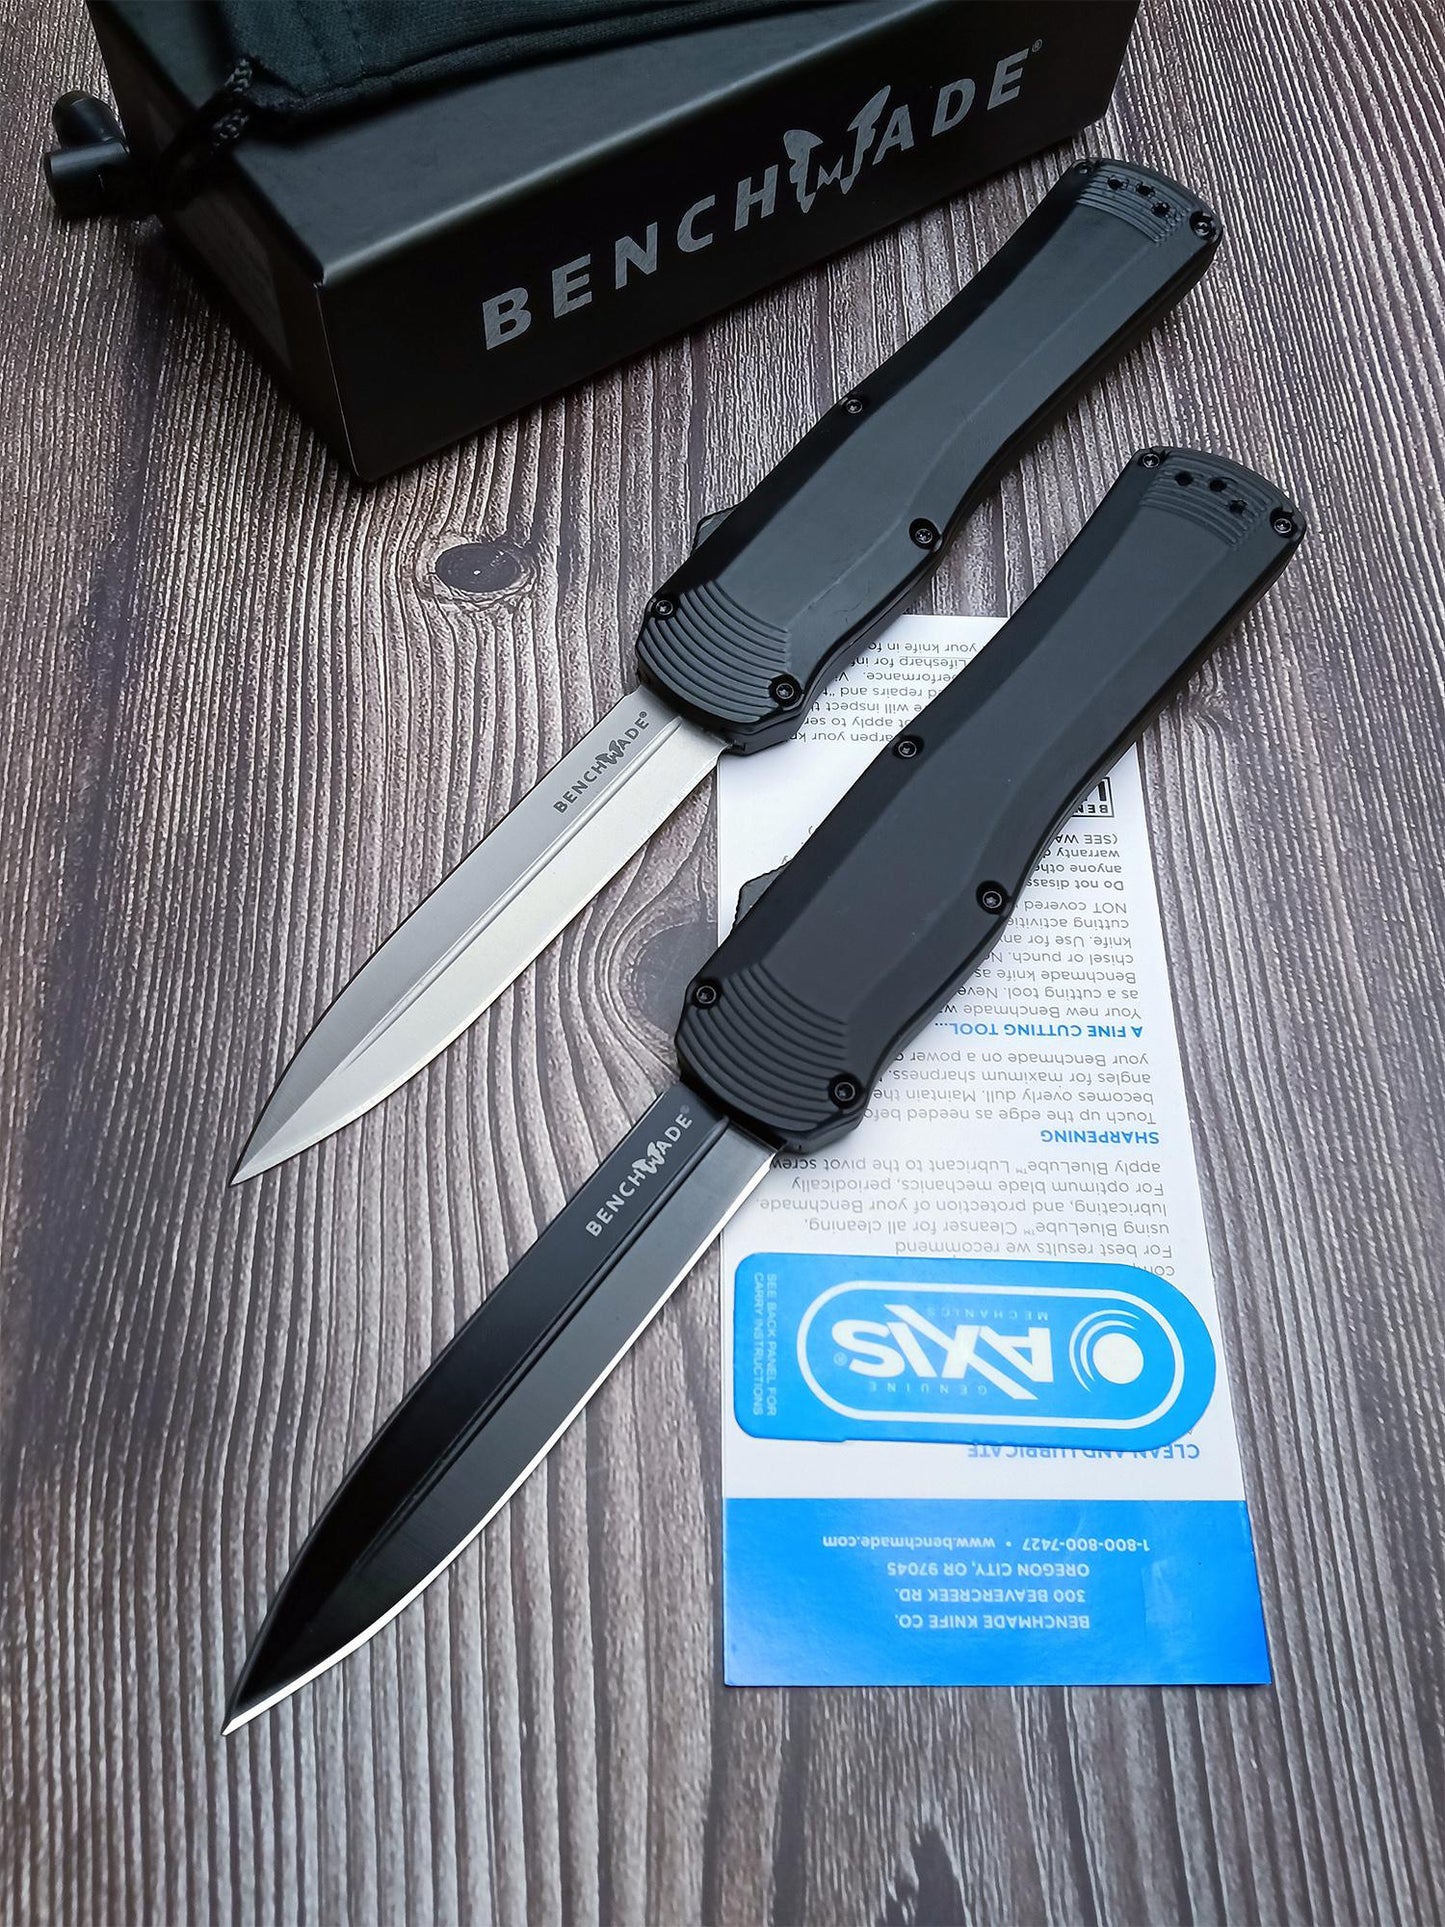 Benchmade Spring Assisted AUTO Knife S30V Double Edge Dagger Blade Camping Self Defense Hunting OTF Knife